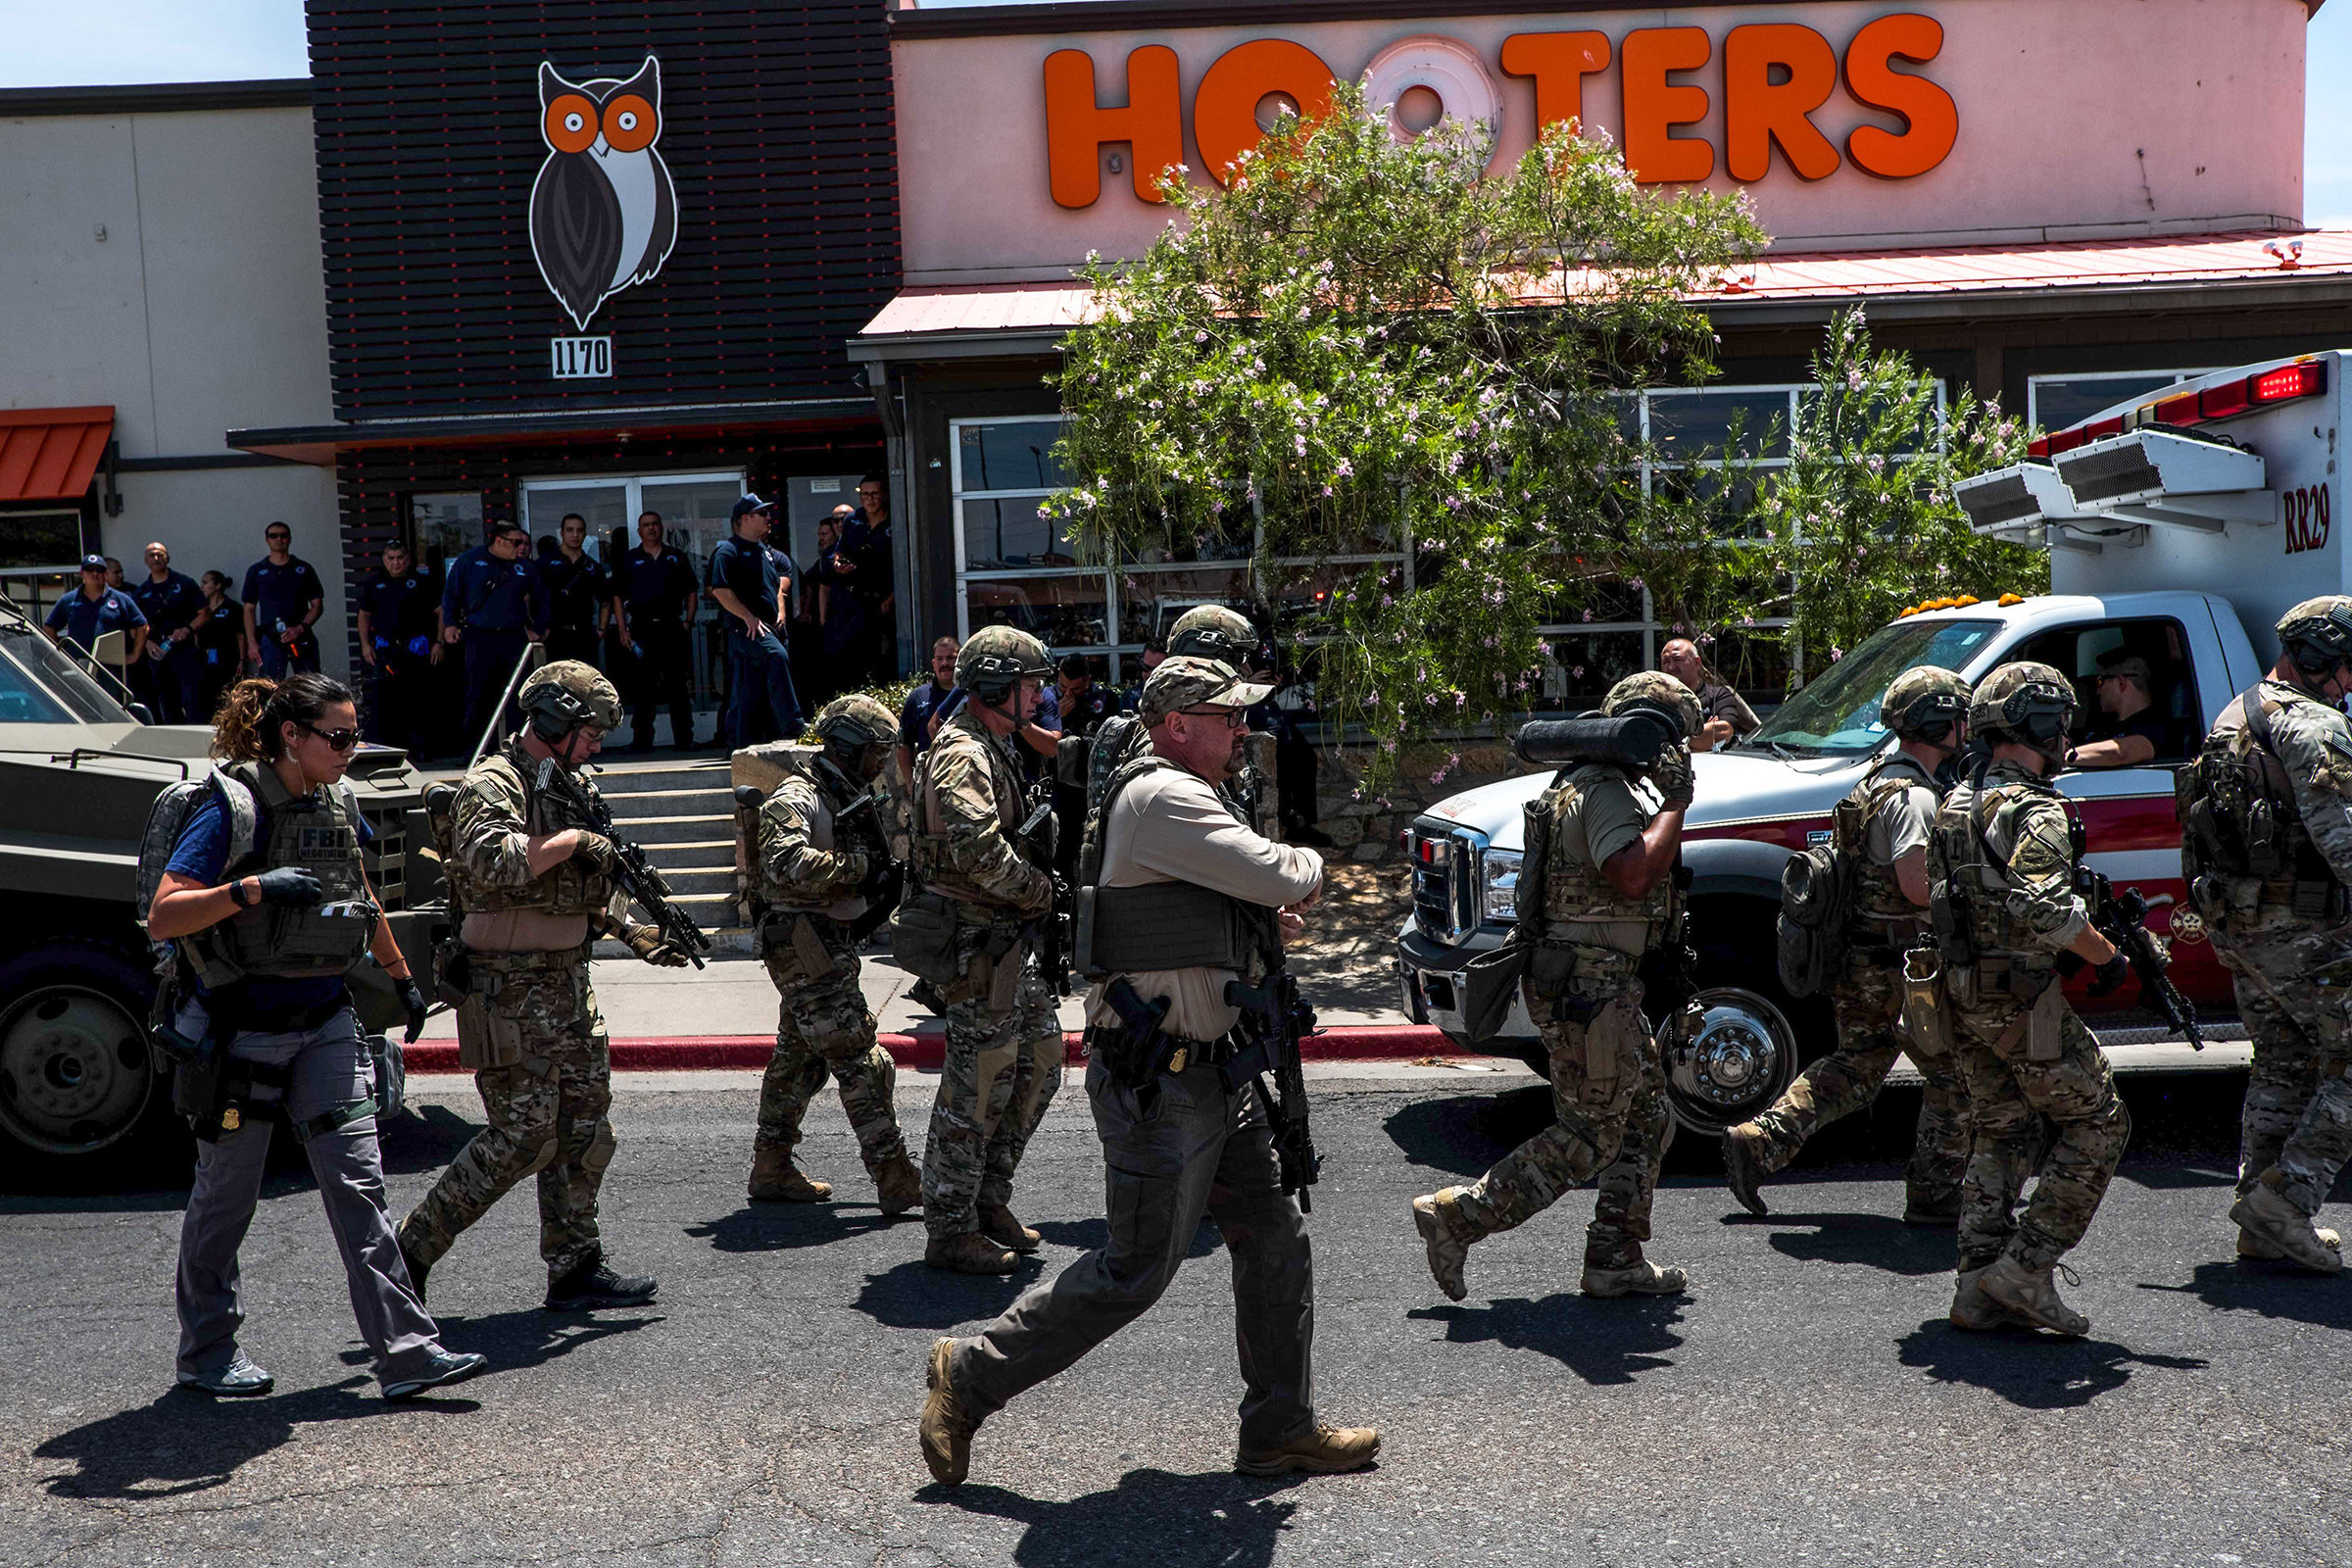 Law enforcement agencies respond to an active shooter at a Wal-Mart near Cielo Vista Mall in El Paso, Texas, Saturday, Aug. 3, 2019. - Police said there may be more than one suspect involved in an active shooter situation Saturday in El Paso, Texas. City police said on Twitter they had received "multi reports of multipe shooters." There was no immediate word on casualties. (Joel Angel—AFP/Getty Images)